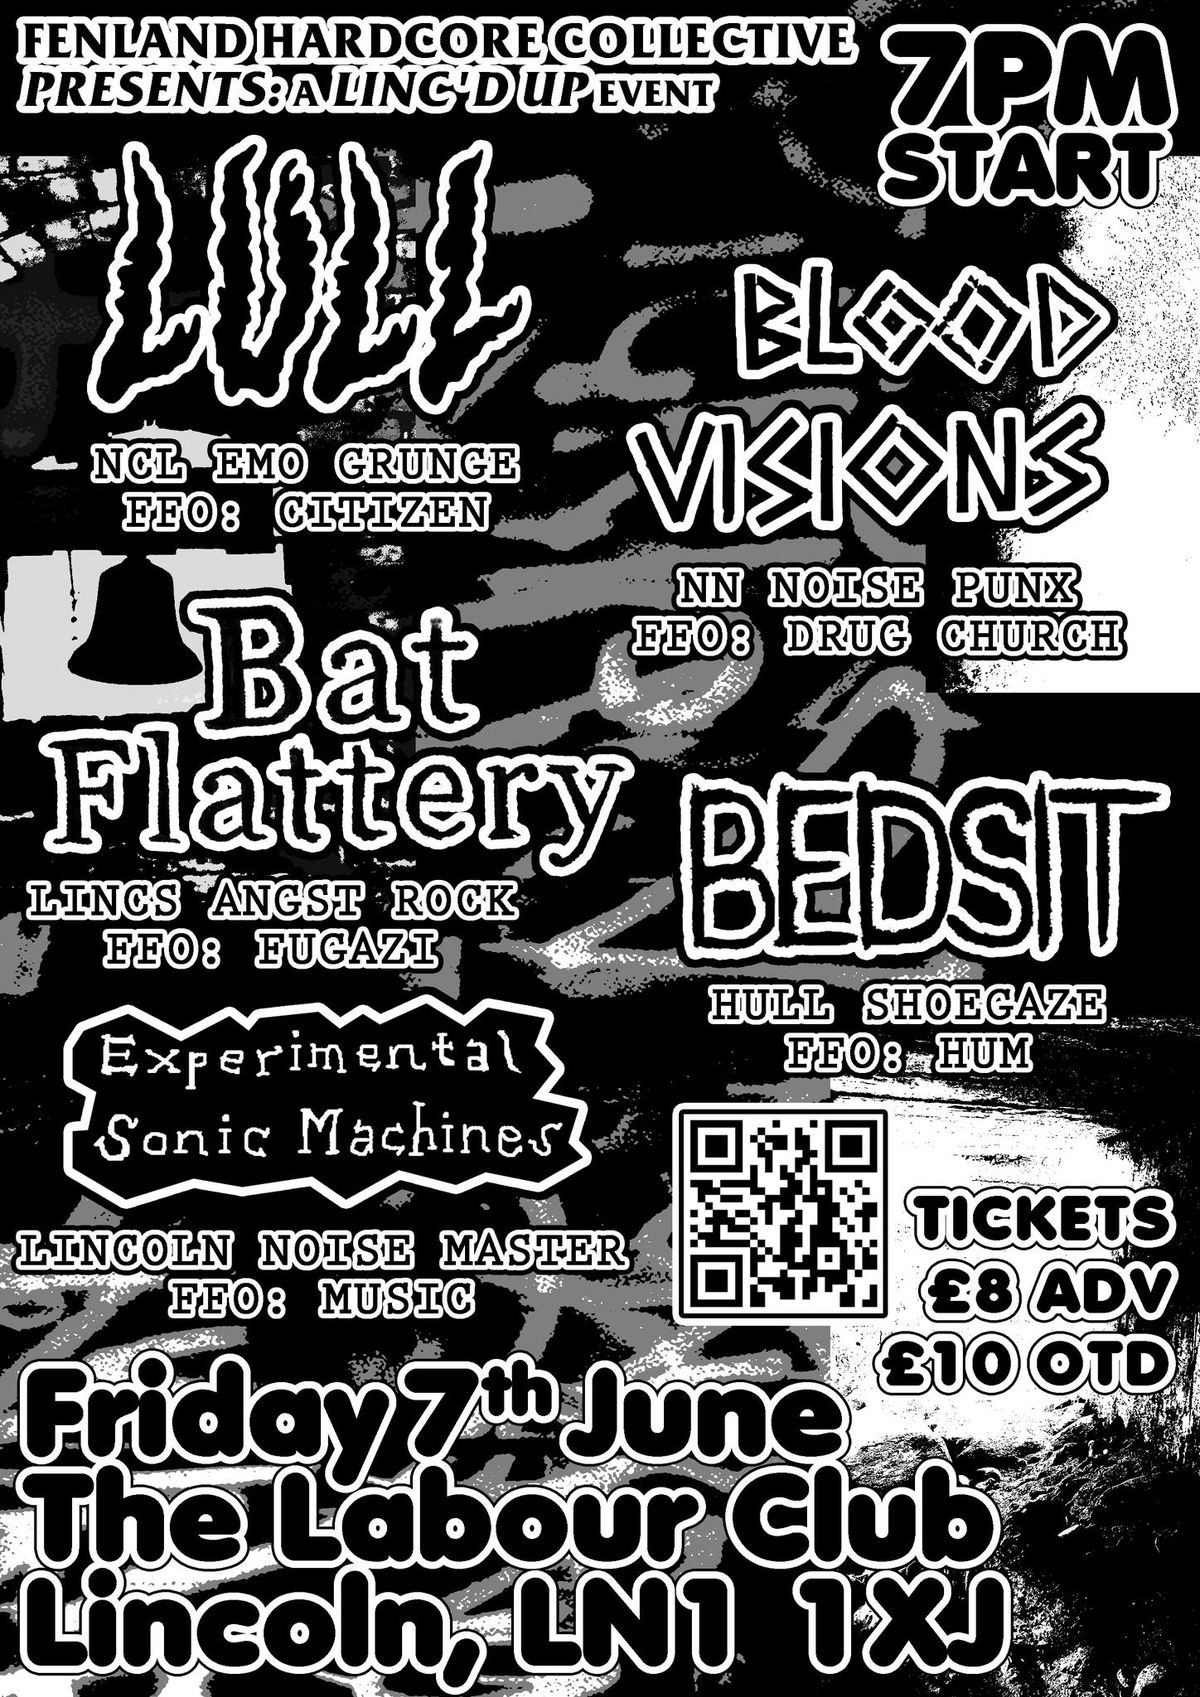 Lull, Blood Visions, Bat Flattery, Bedsit, rugbyleague. The Labour Club, Lincoln. 7\/6\/24.